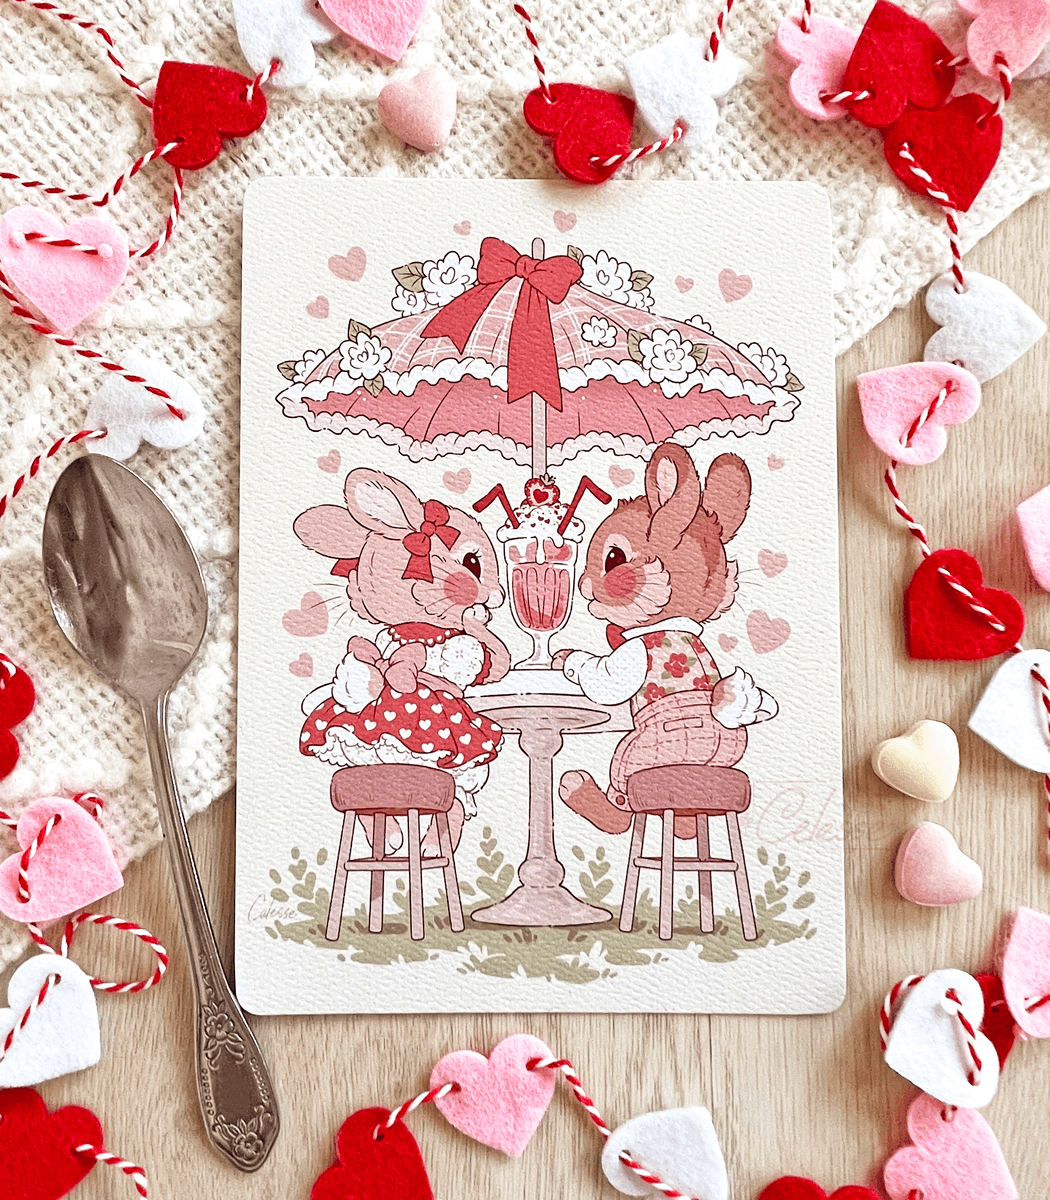 Available as cards and prints via my artist shop! 🥰 https://t.co/qfdiK6N4Eg 